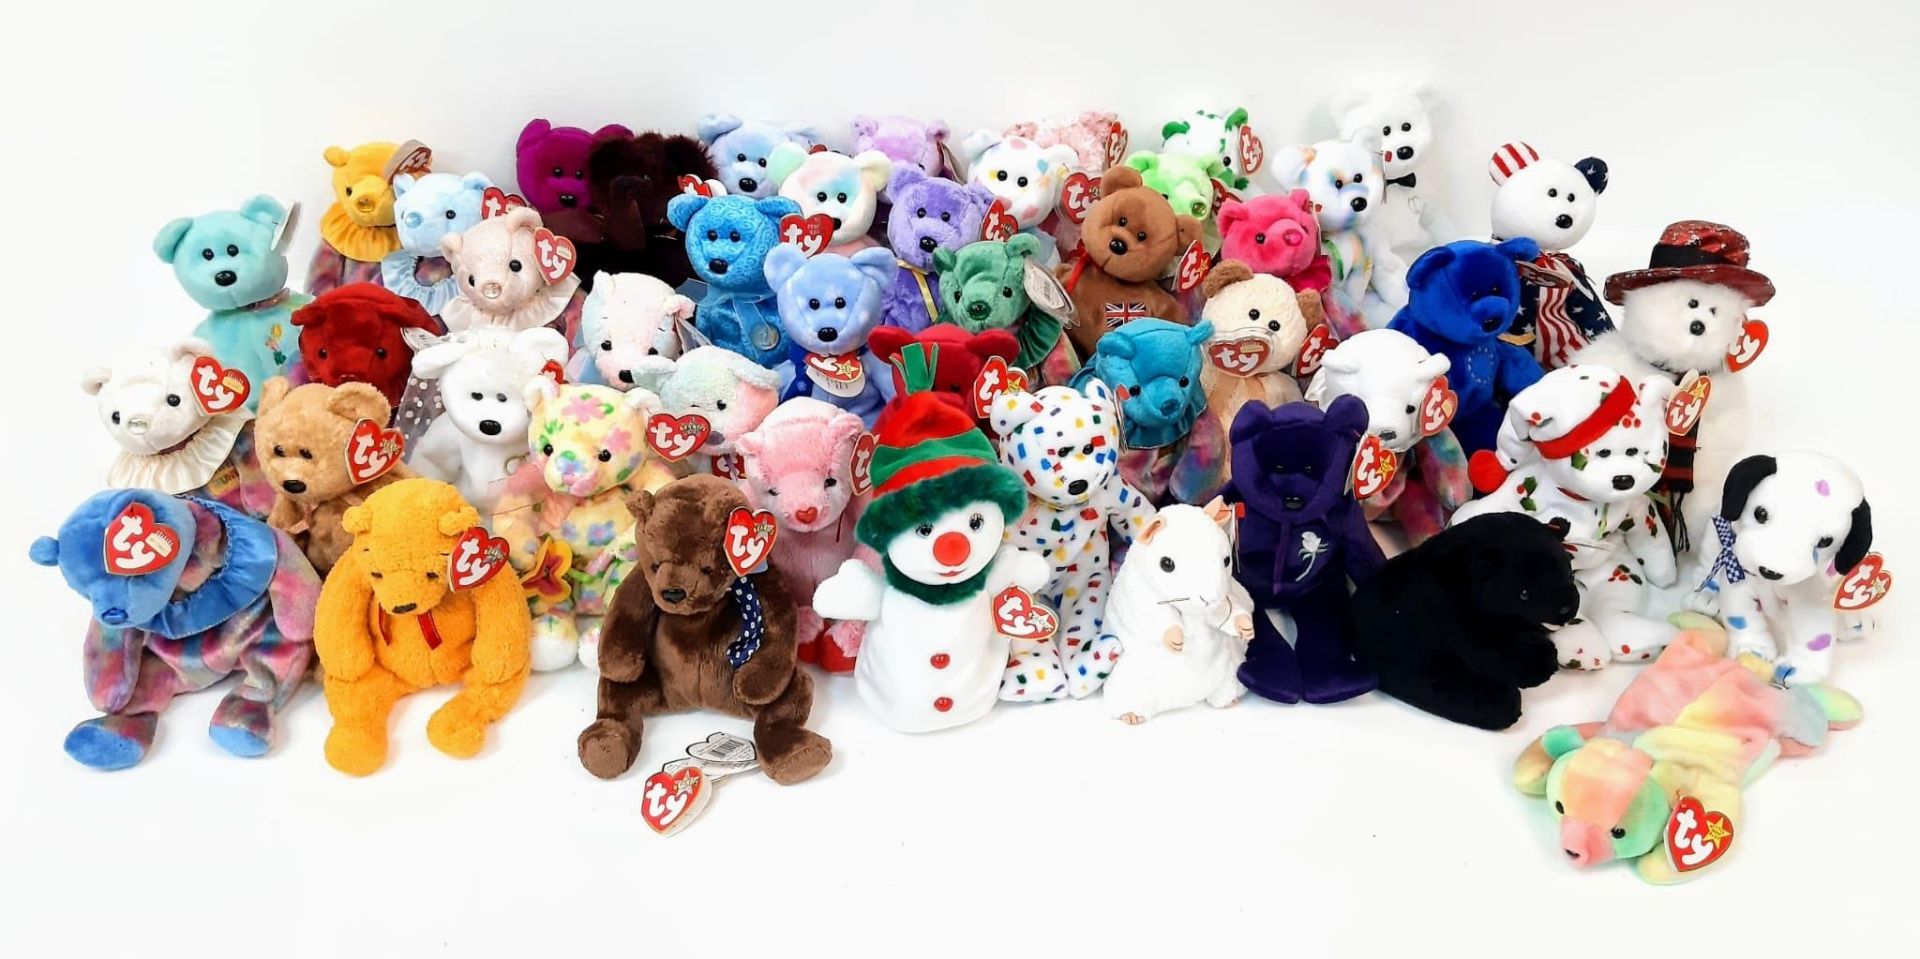 A Collection of 47 TY Beanie Babies. All in good condition.